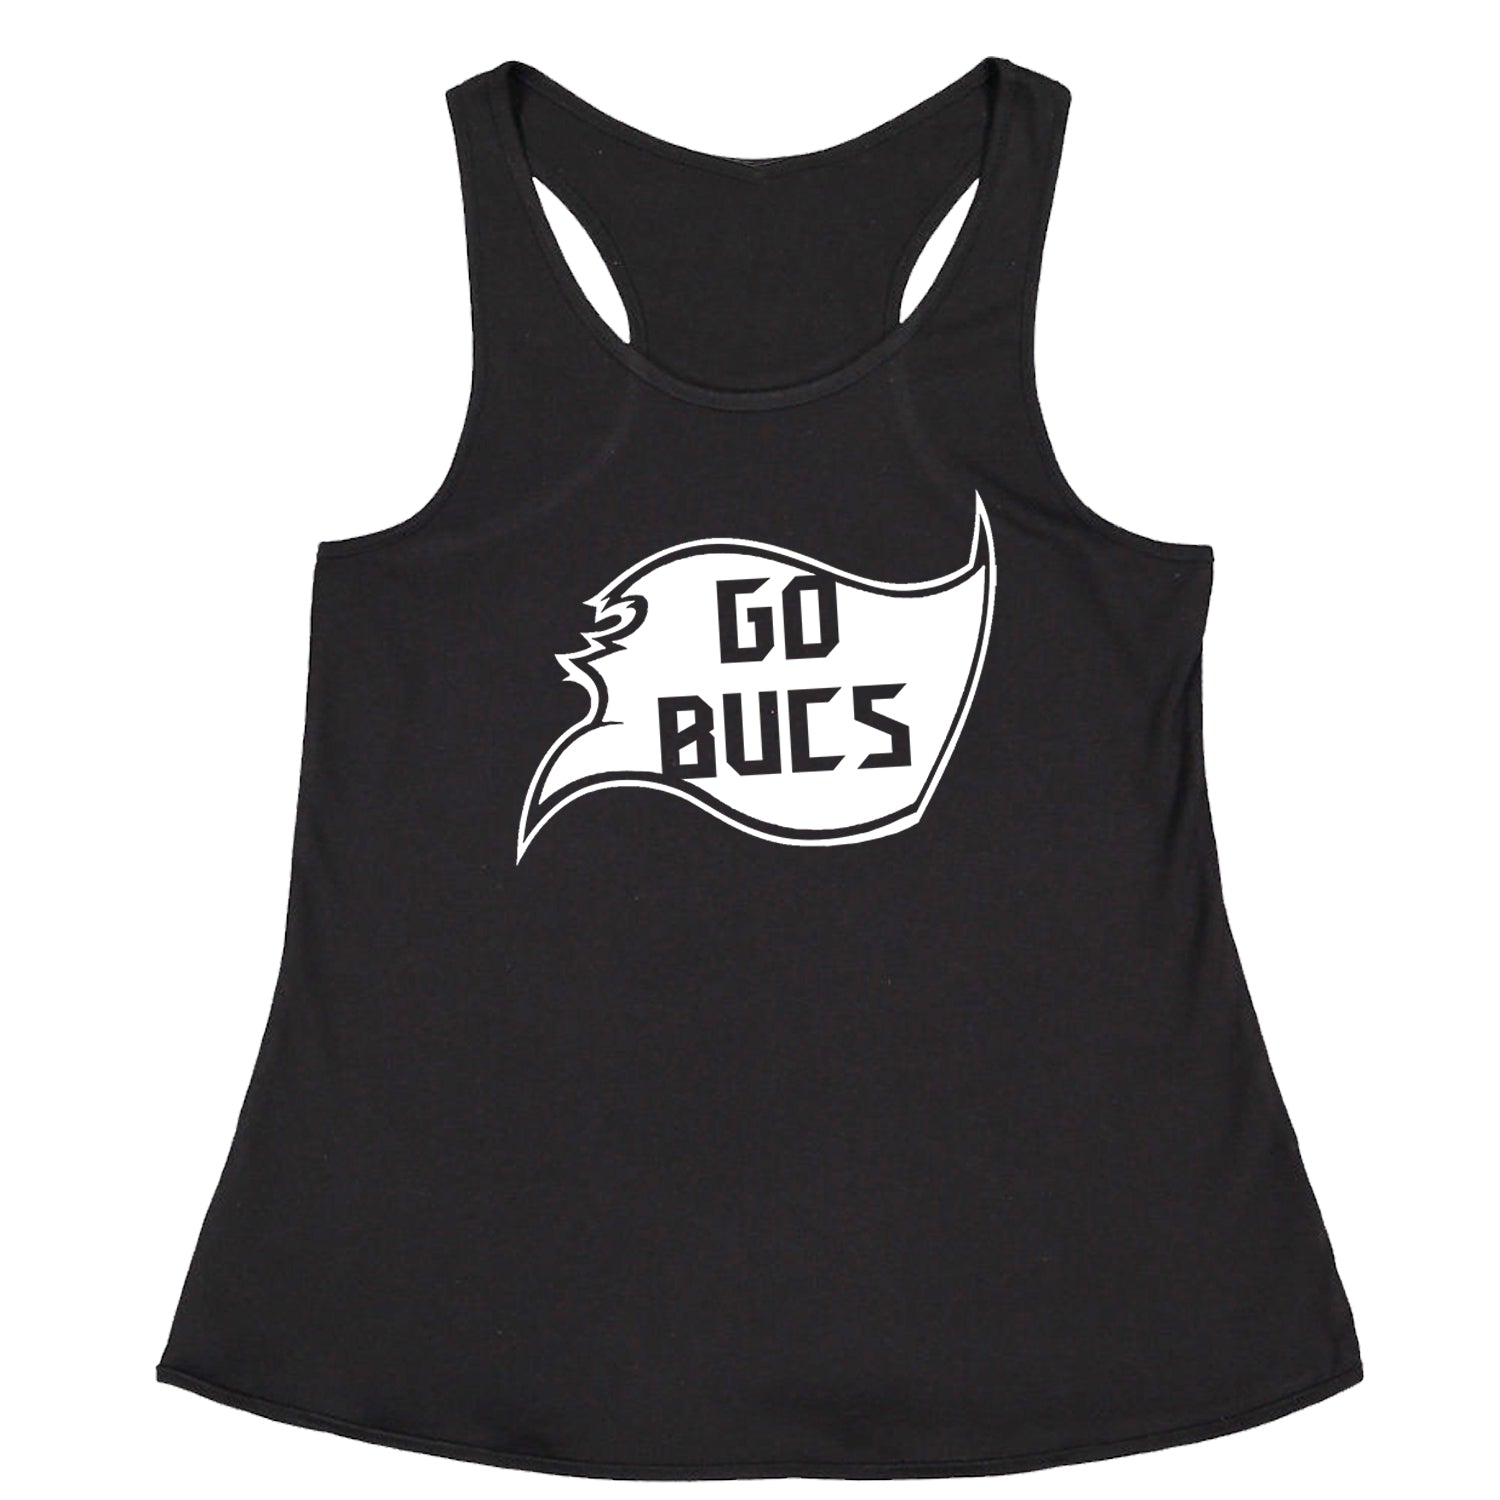 Go Bucs Buccaneers Racerback Tank Top for Women ball, flag, foot, raise, tampa, the by Expression Tees